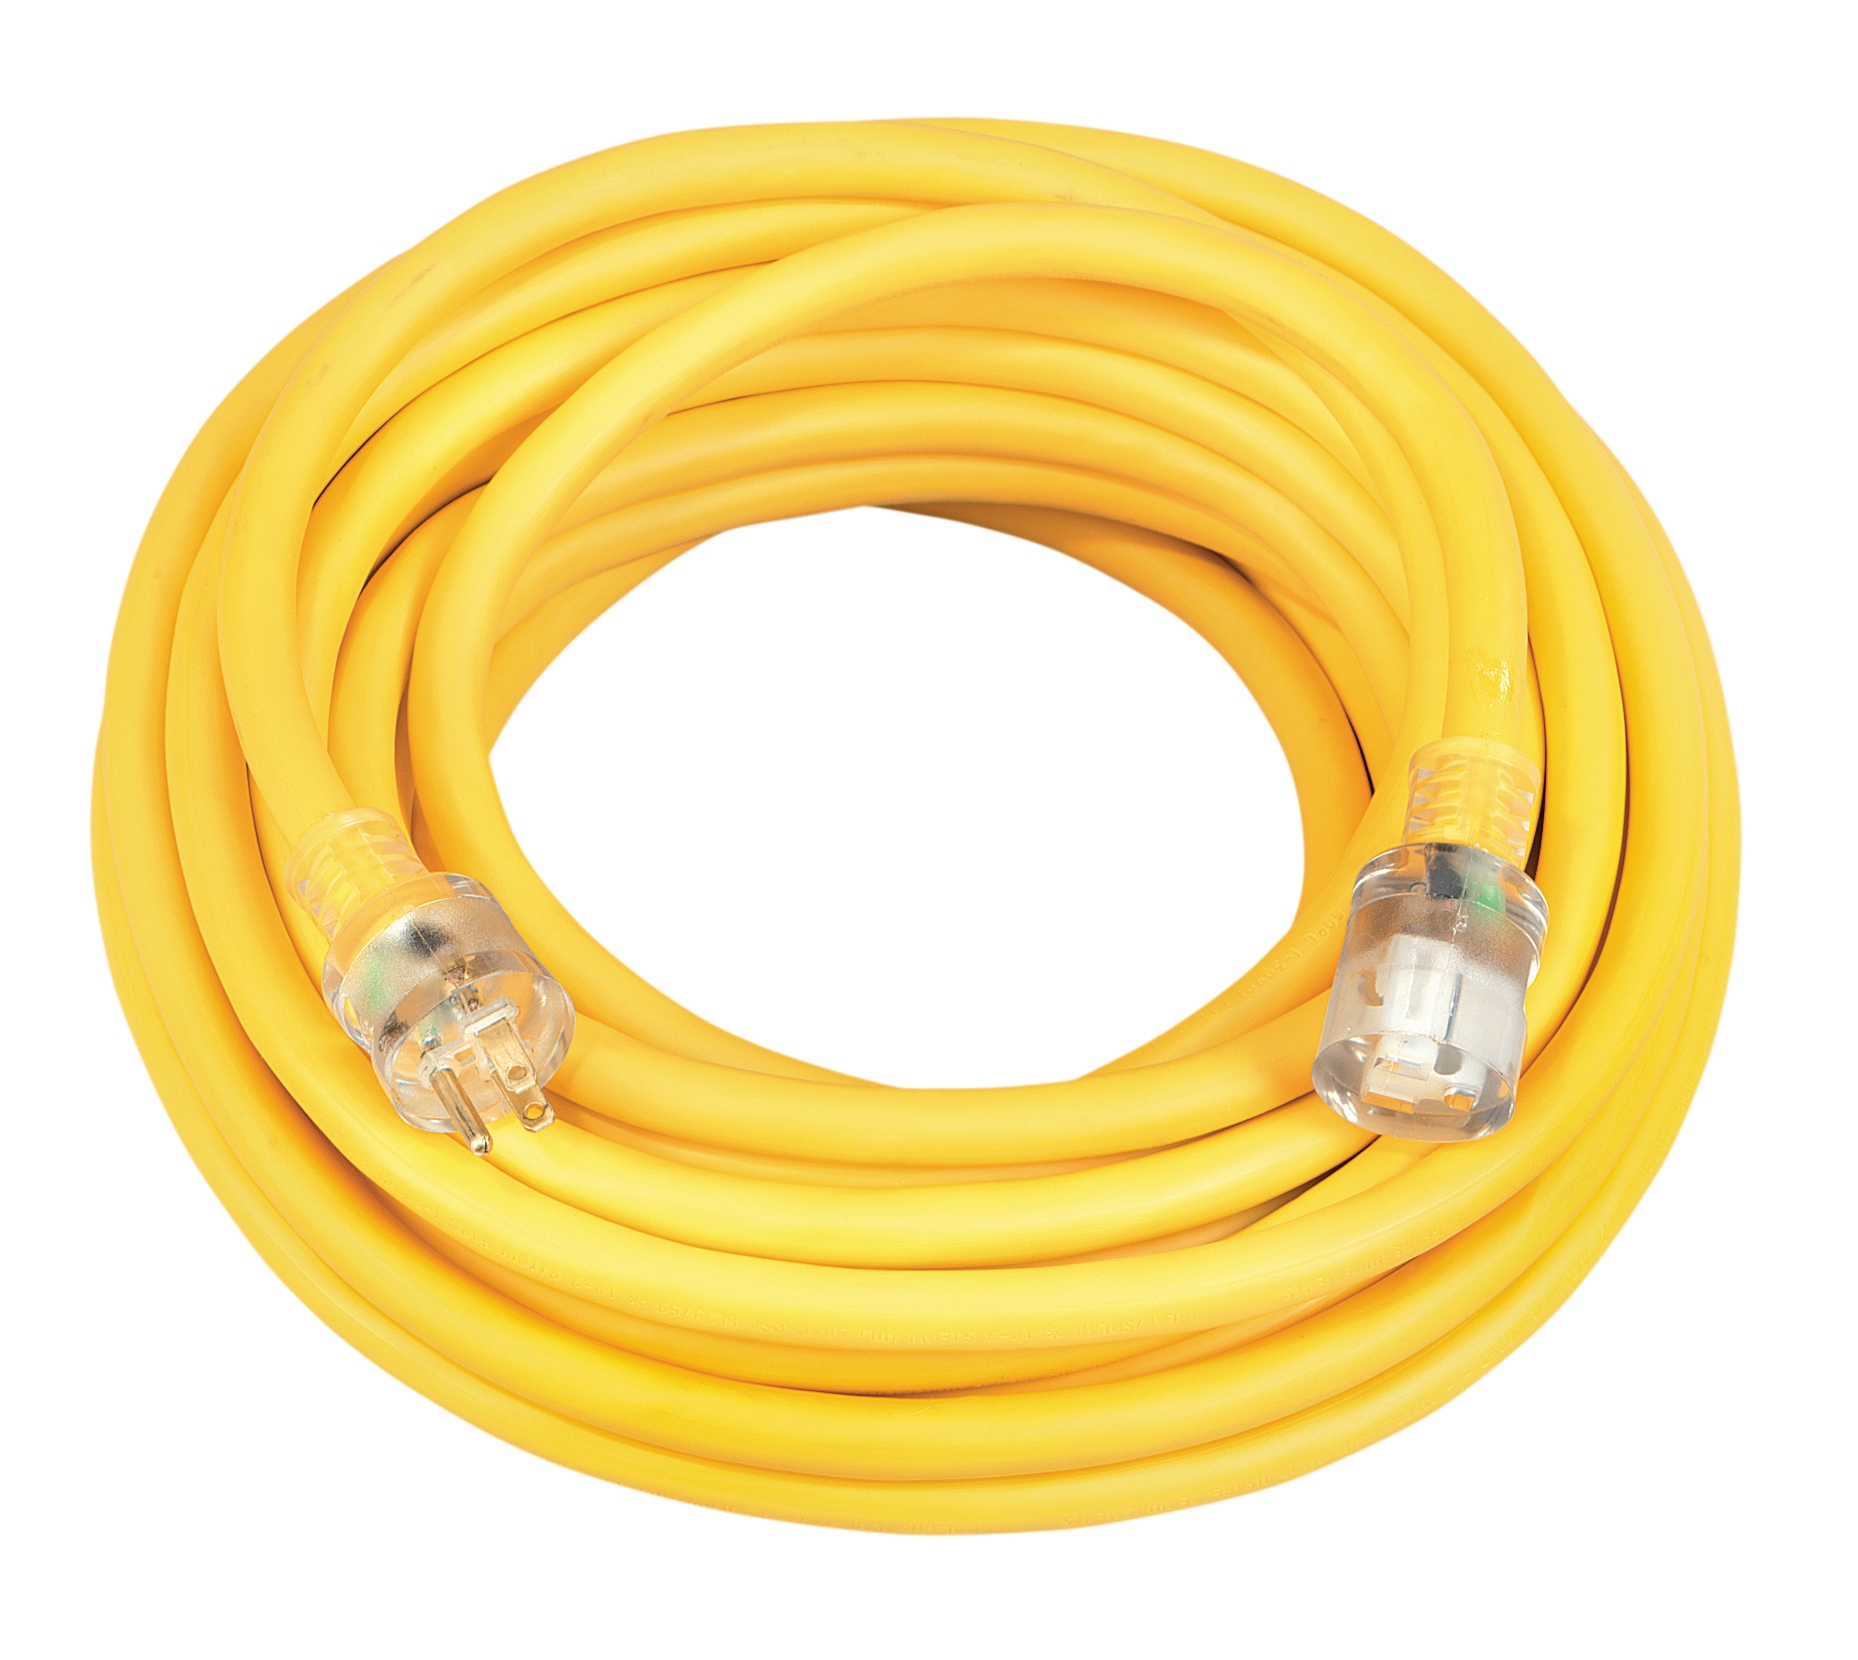 Plastic Yellow Indoor Flooring Electric Wire Cover for Protection Cables -  China Cable Protector, Cord Floor Cover